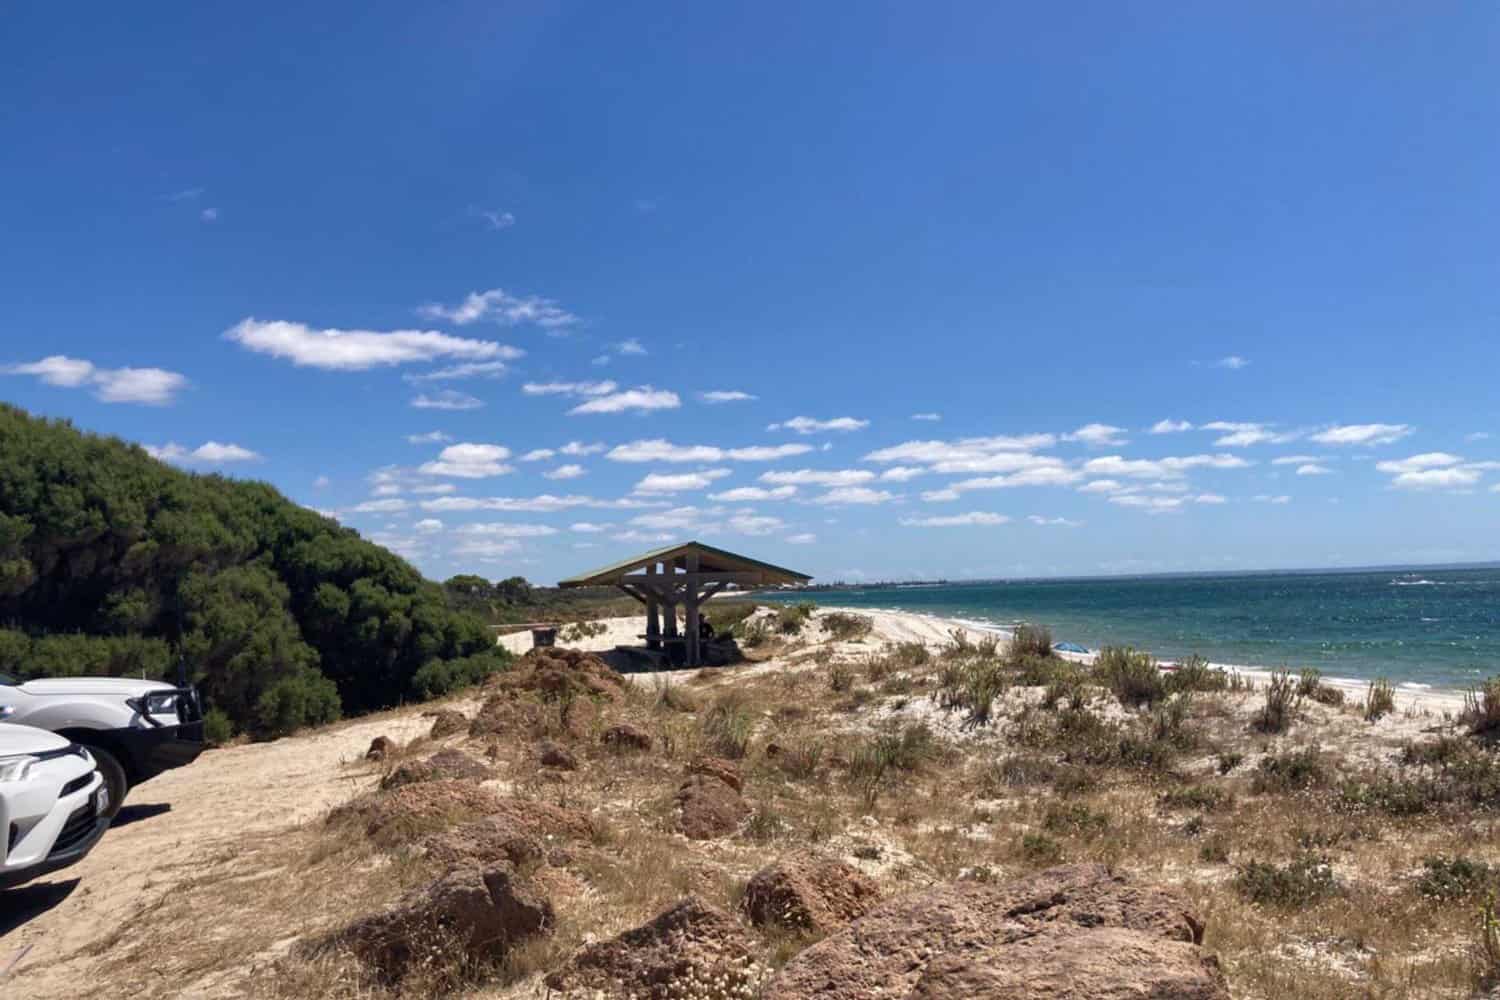 Picnic area overlooking the dunes and clear waters of Busselton beaches with a bright blue sky above.